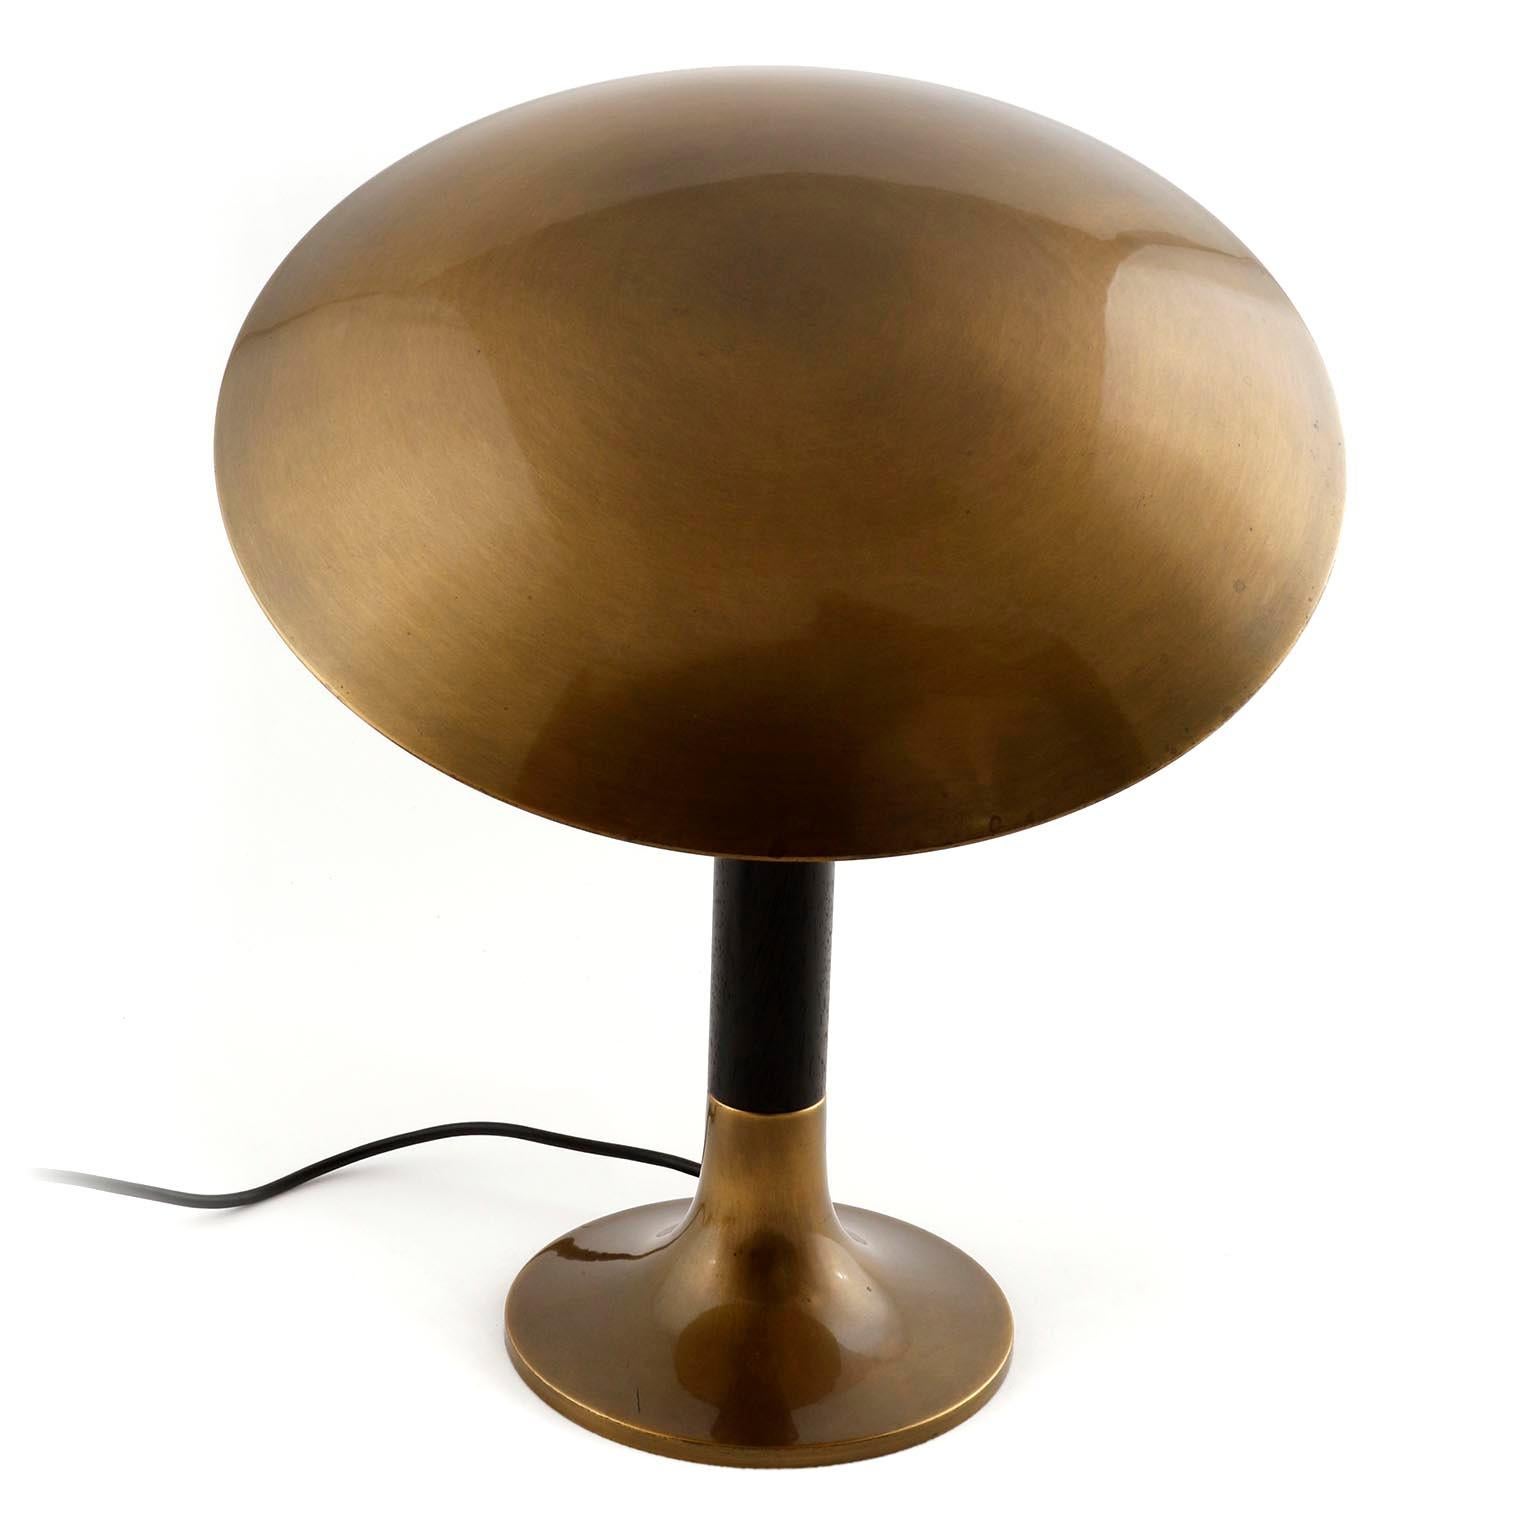 Late 20th Century Florian Schulz Table Lamp Swivel Shade, Patinated Brass Ebonized Wood, 1970s